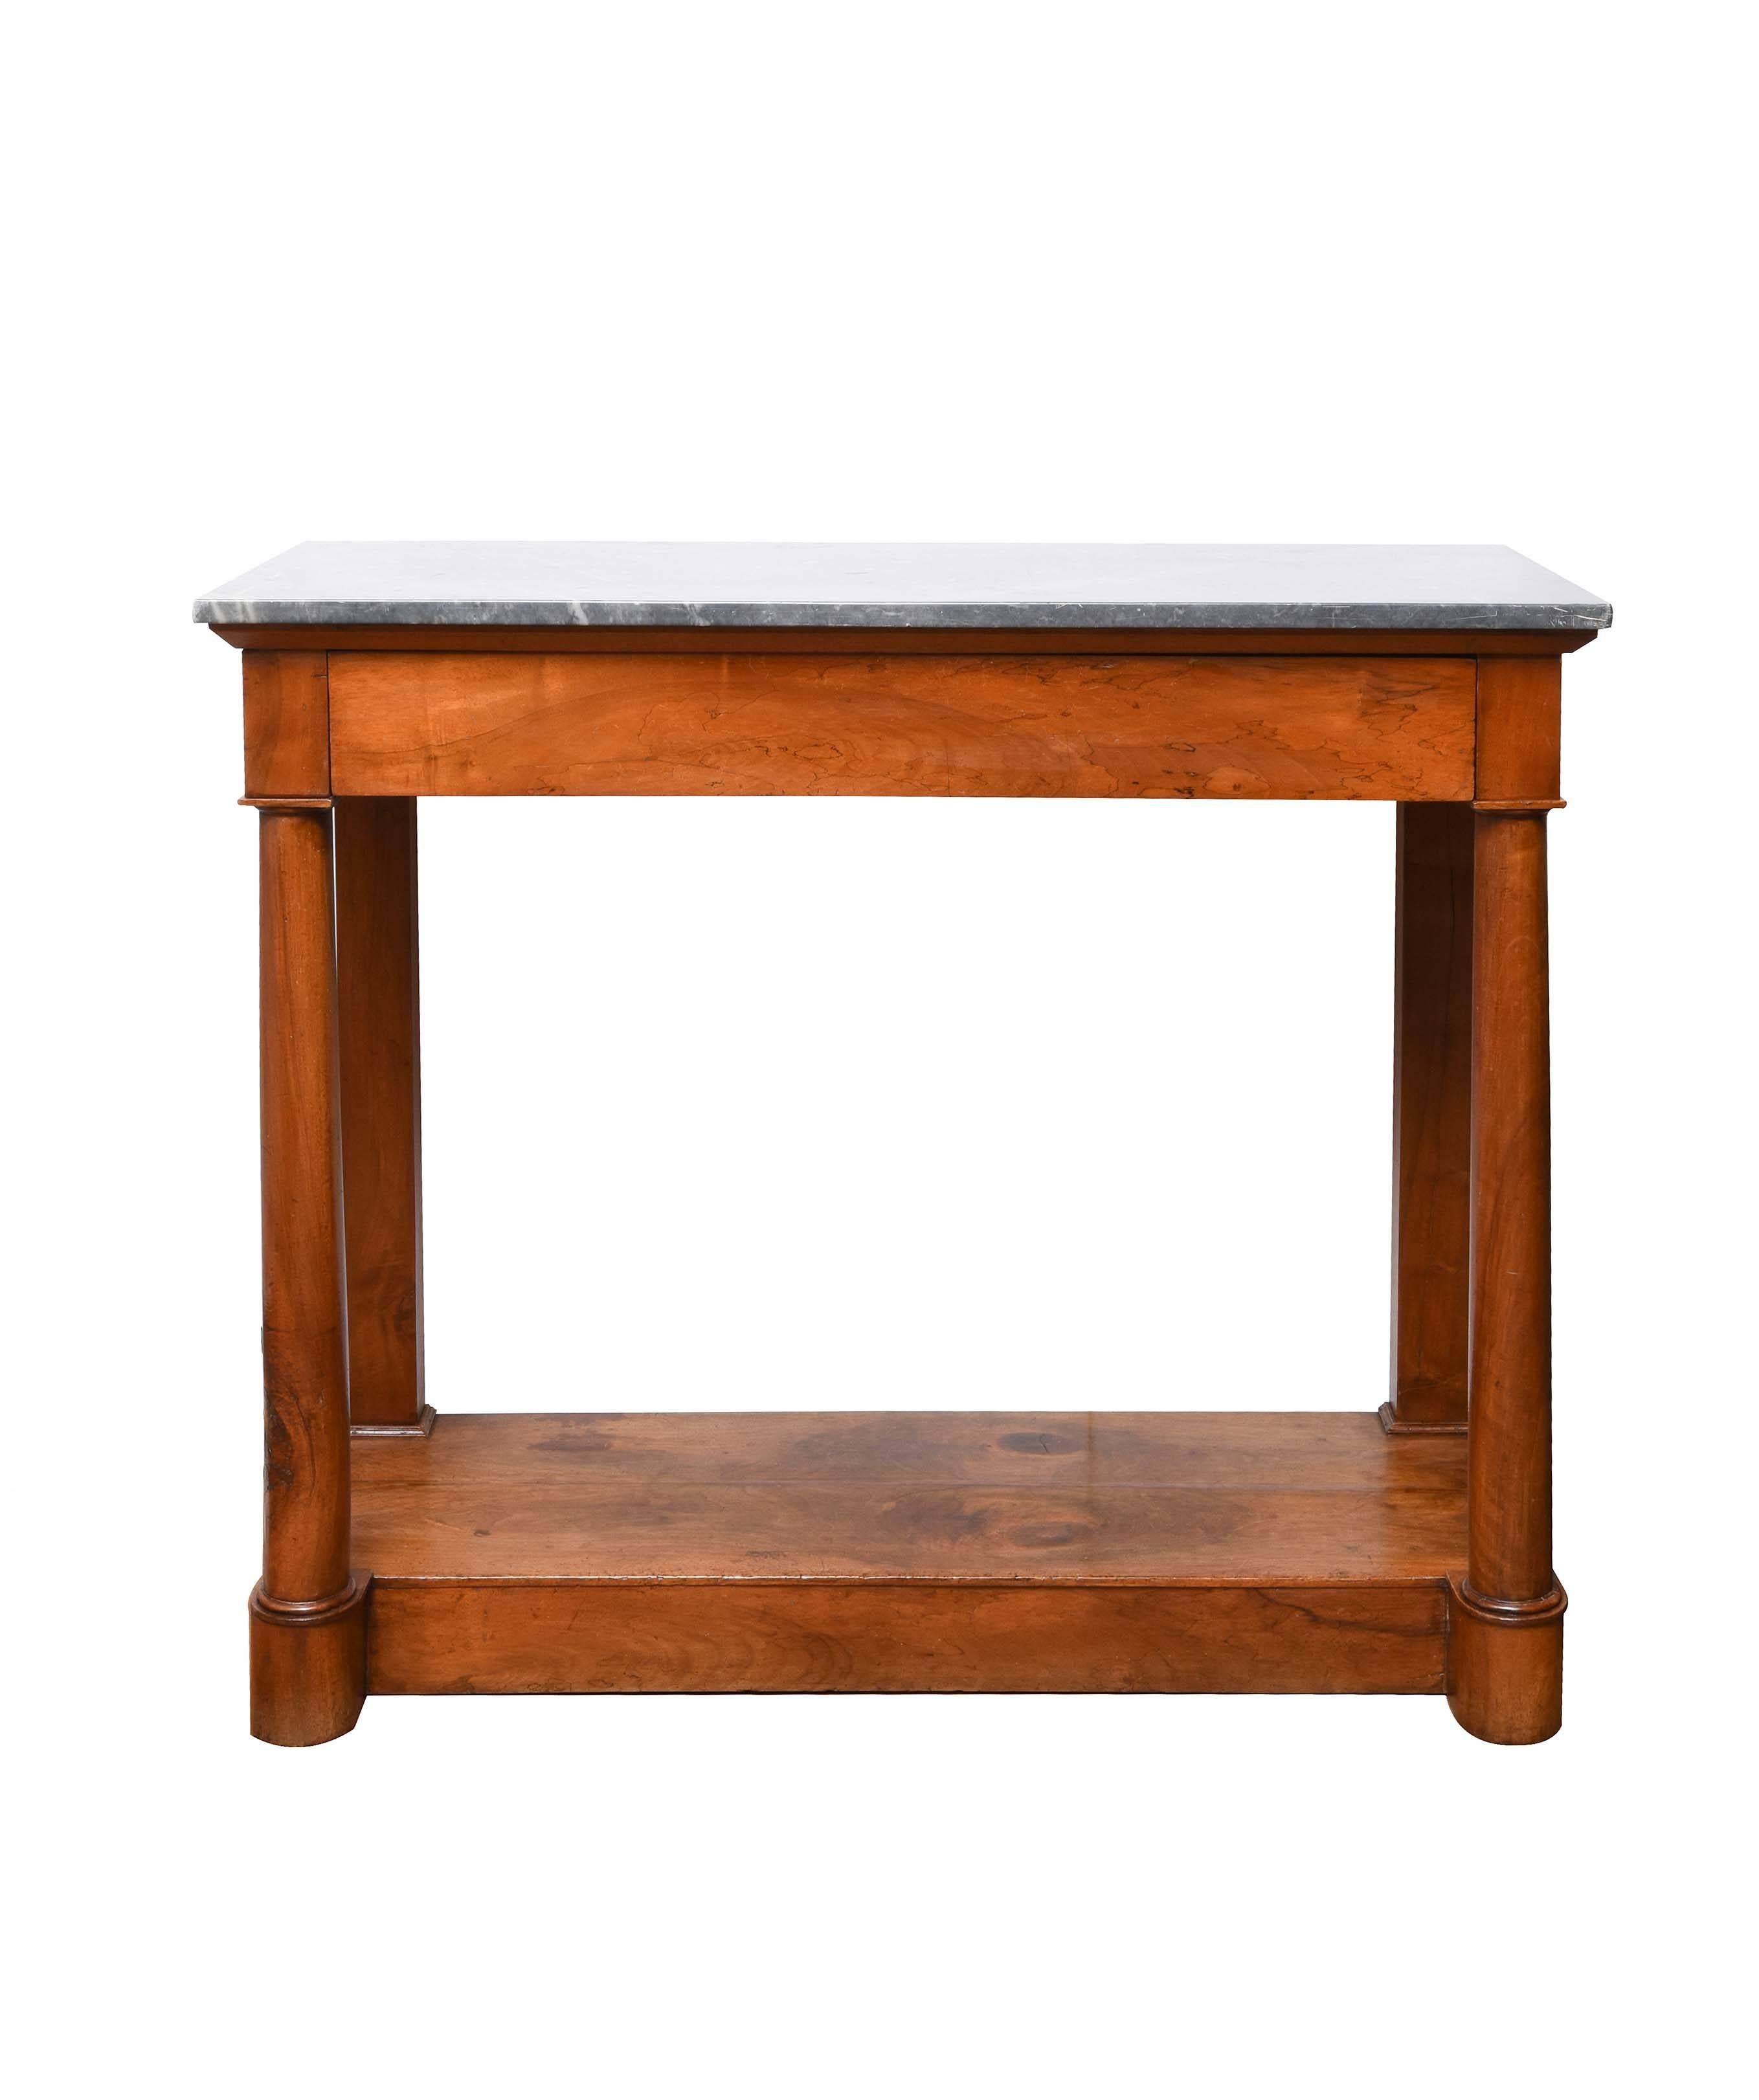 French empire walnut and marble console.